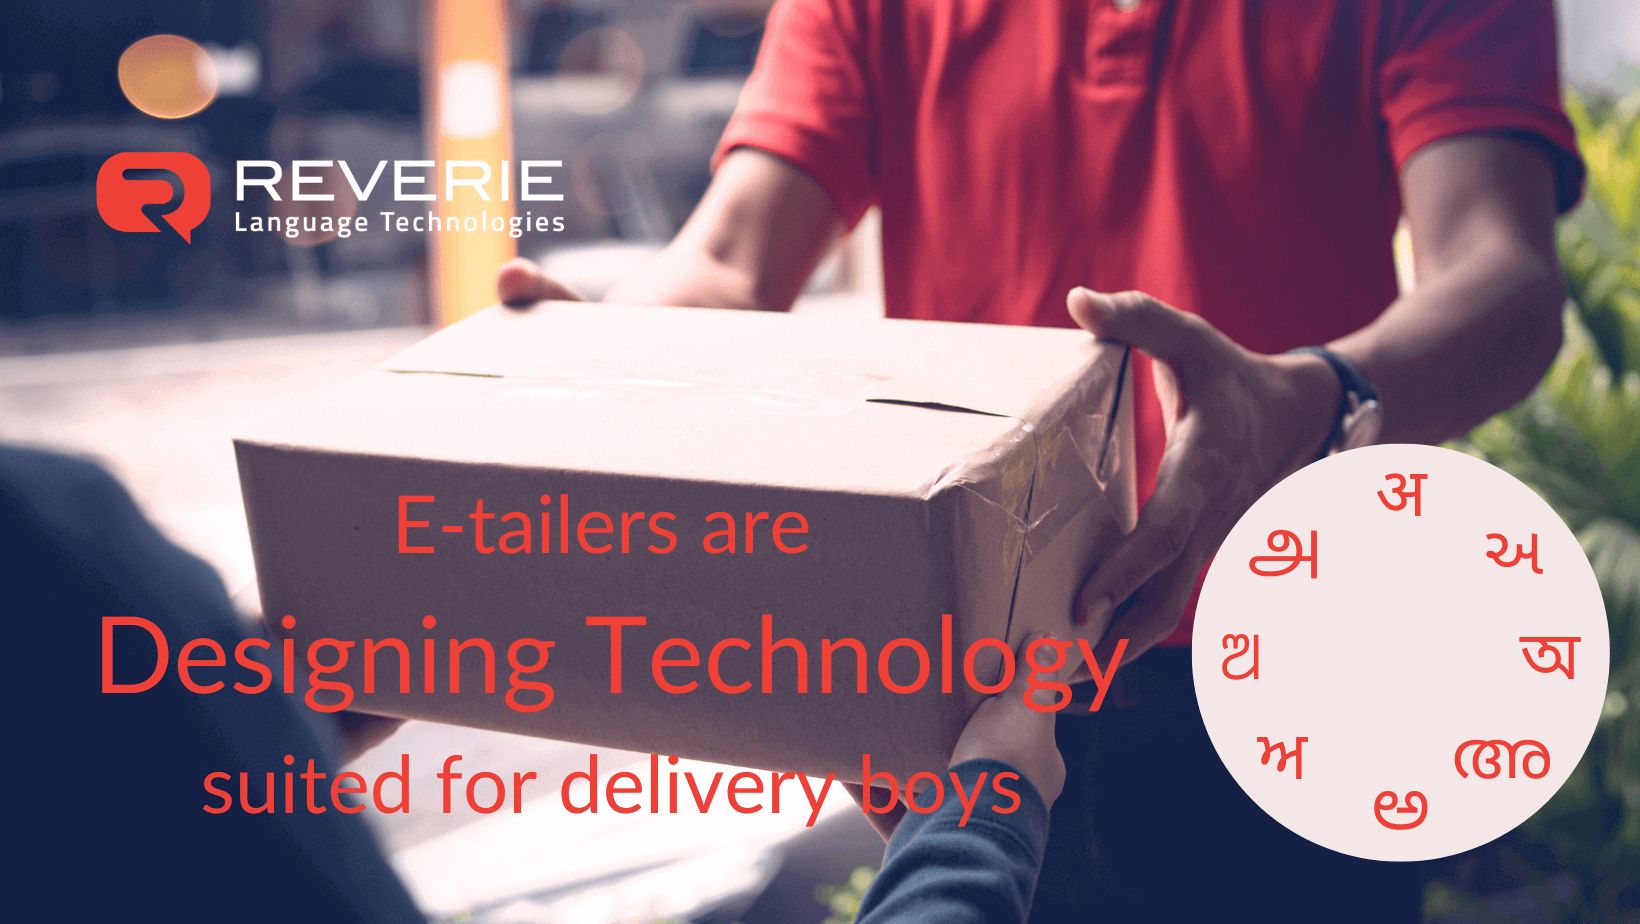 E-tailers are Designing Technology suited for delivery boys